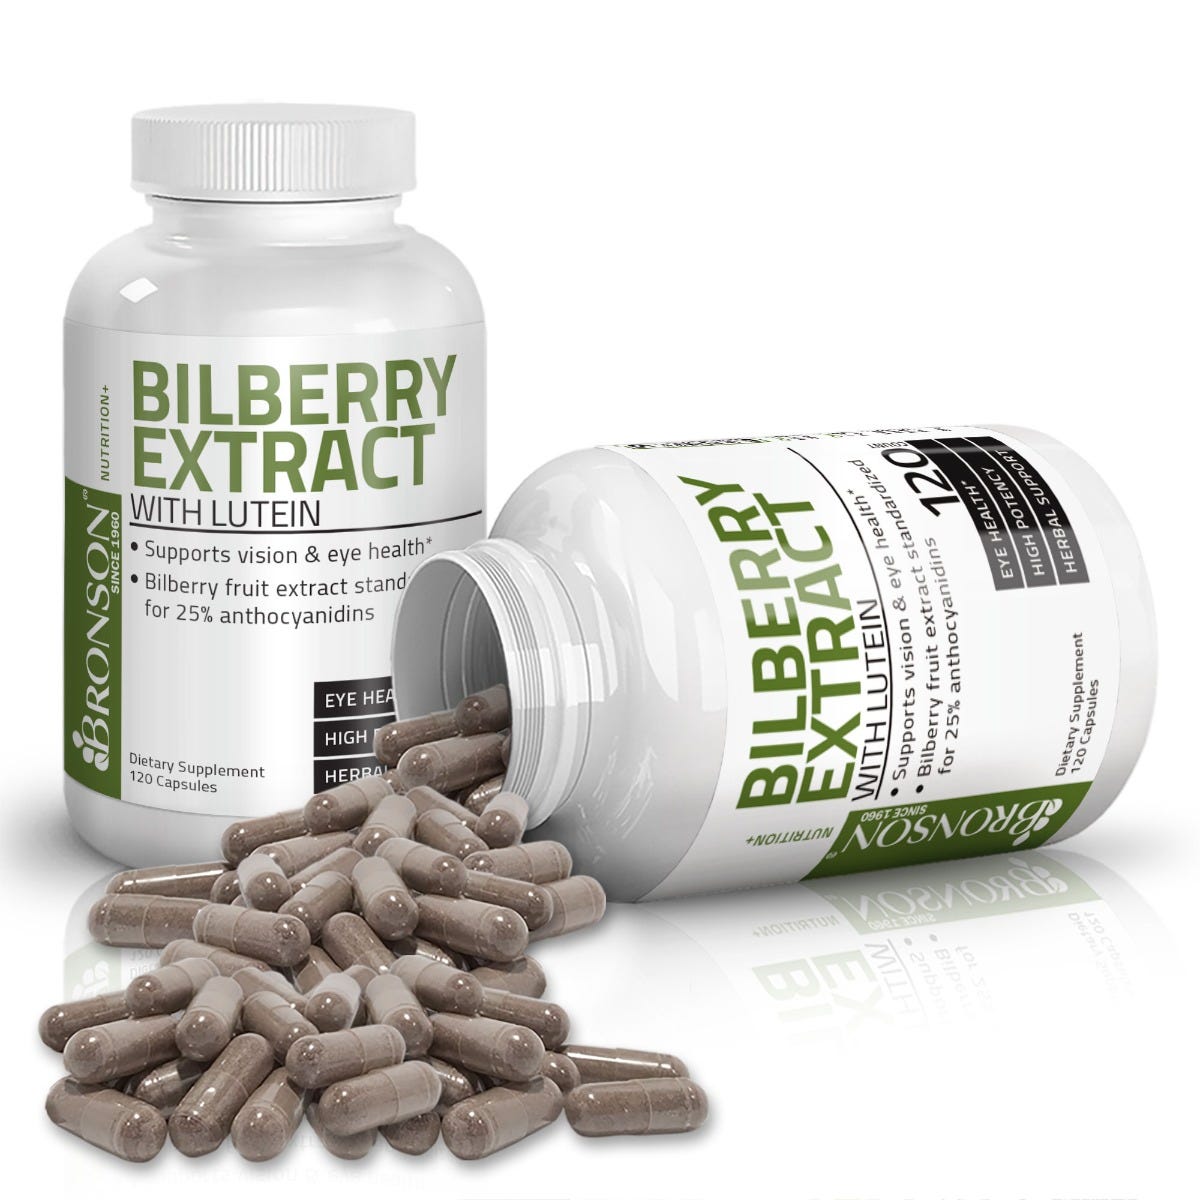 Bilberry with Lutein High Potency - 120 Capsules view 4 of 6